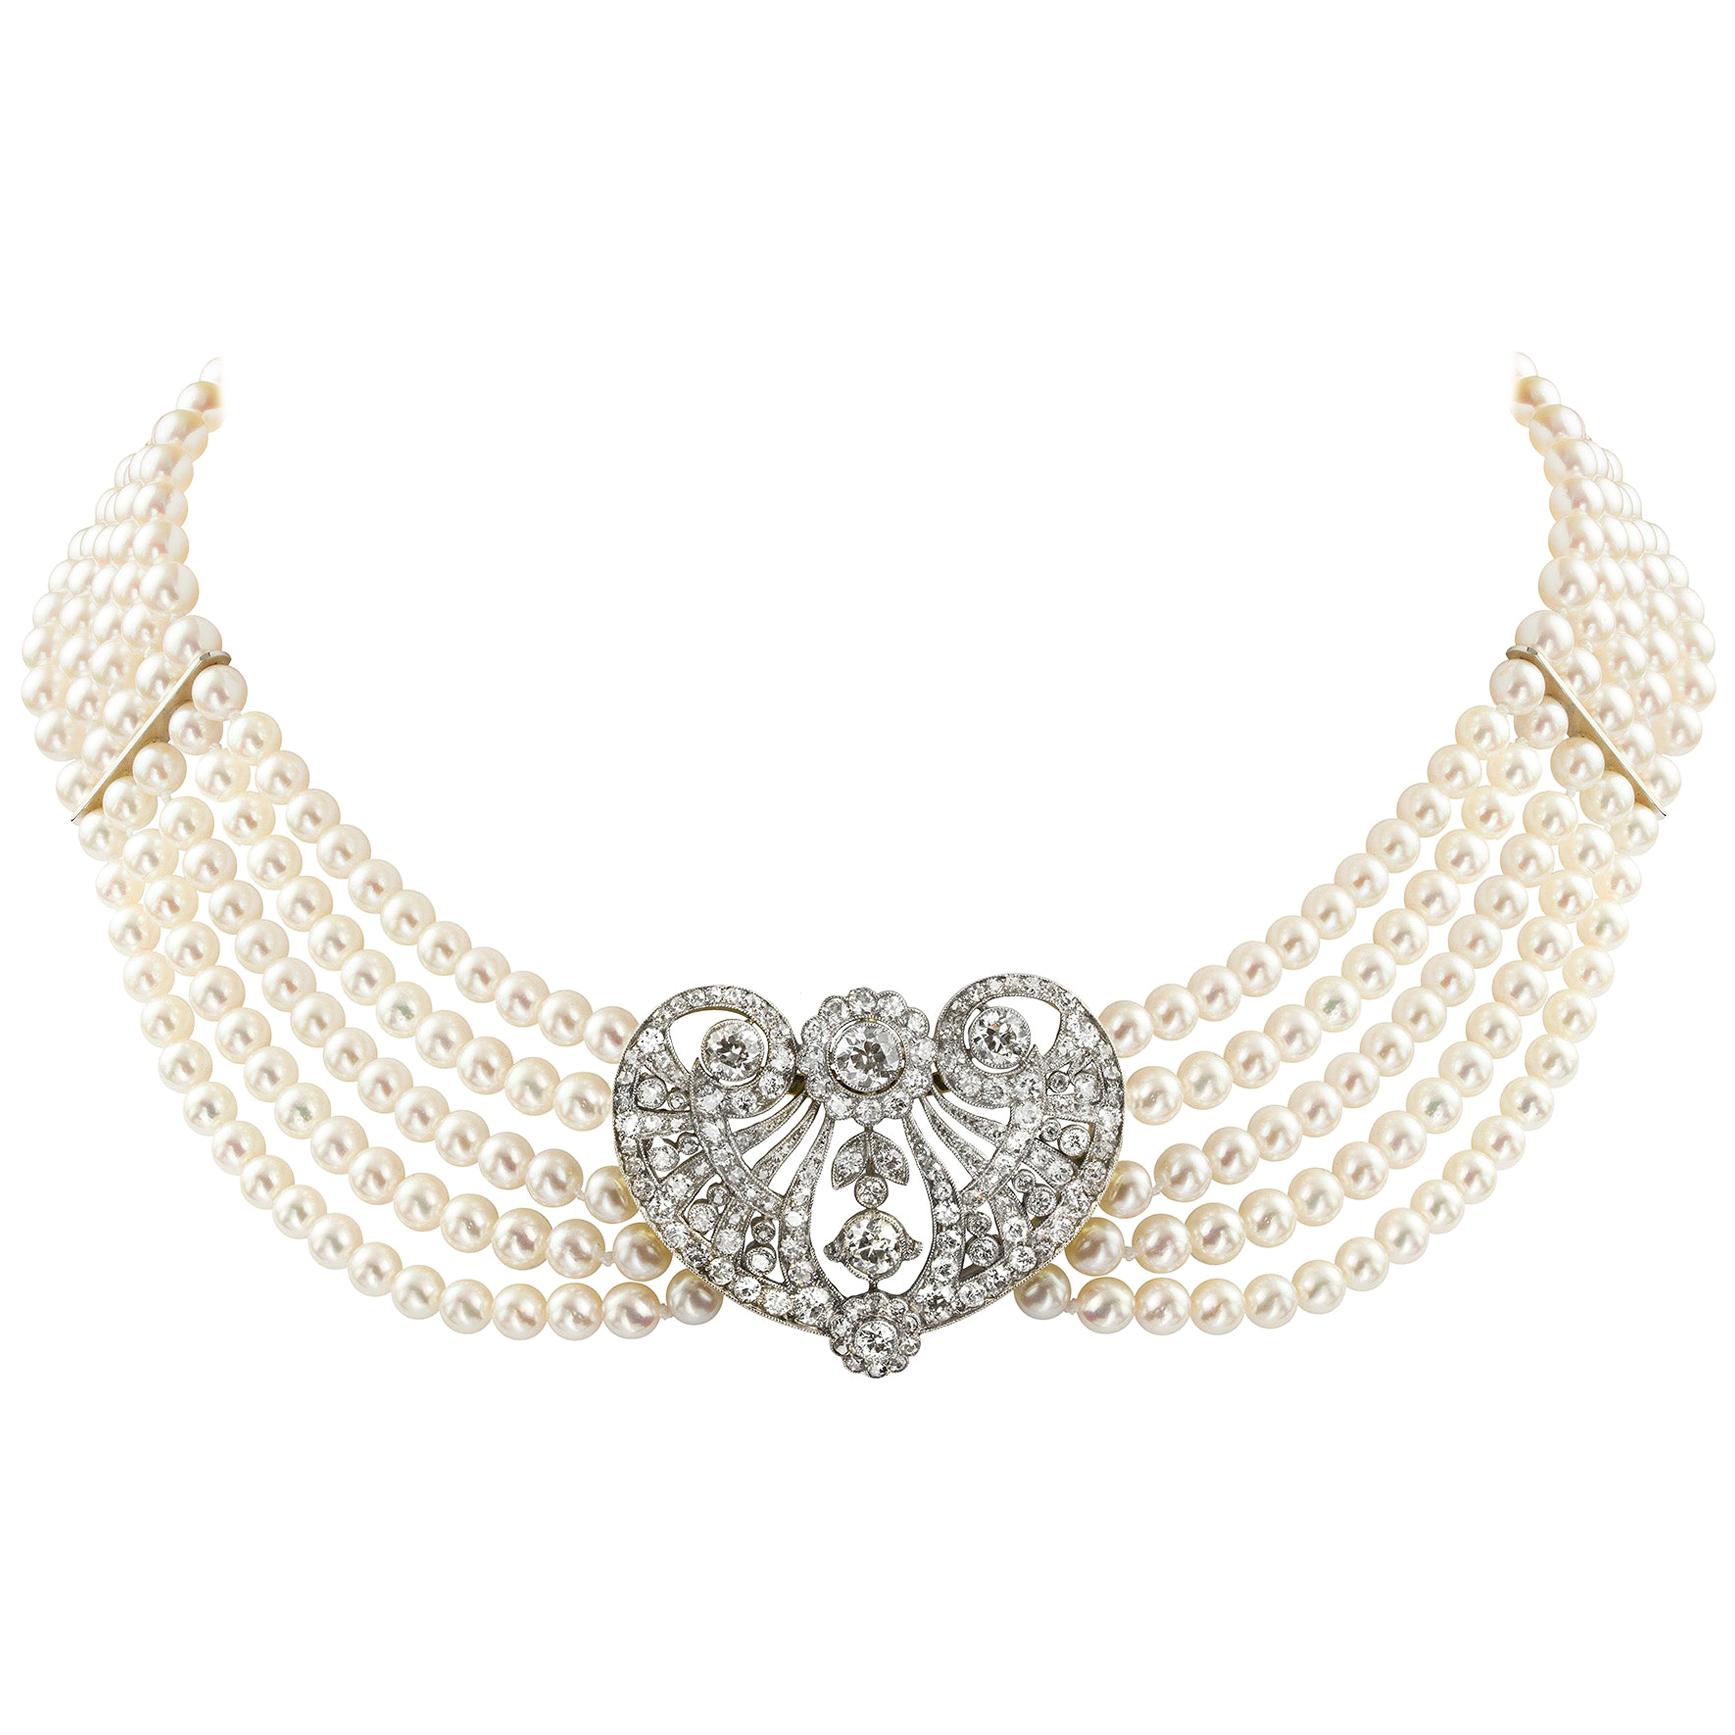 Diamond and Cultured Pearl Necklace